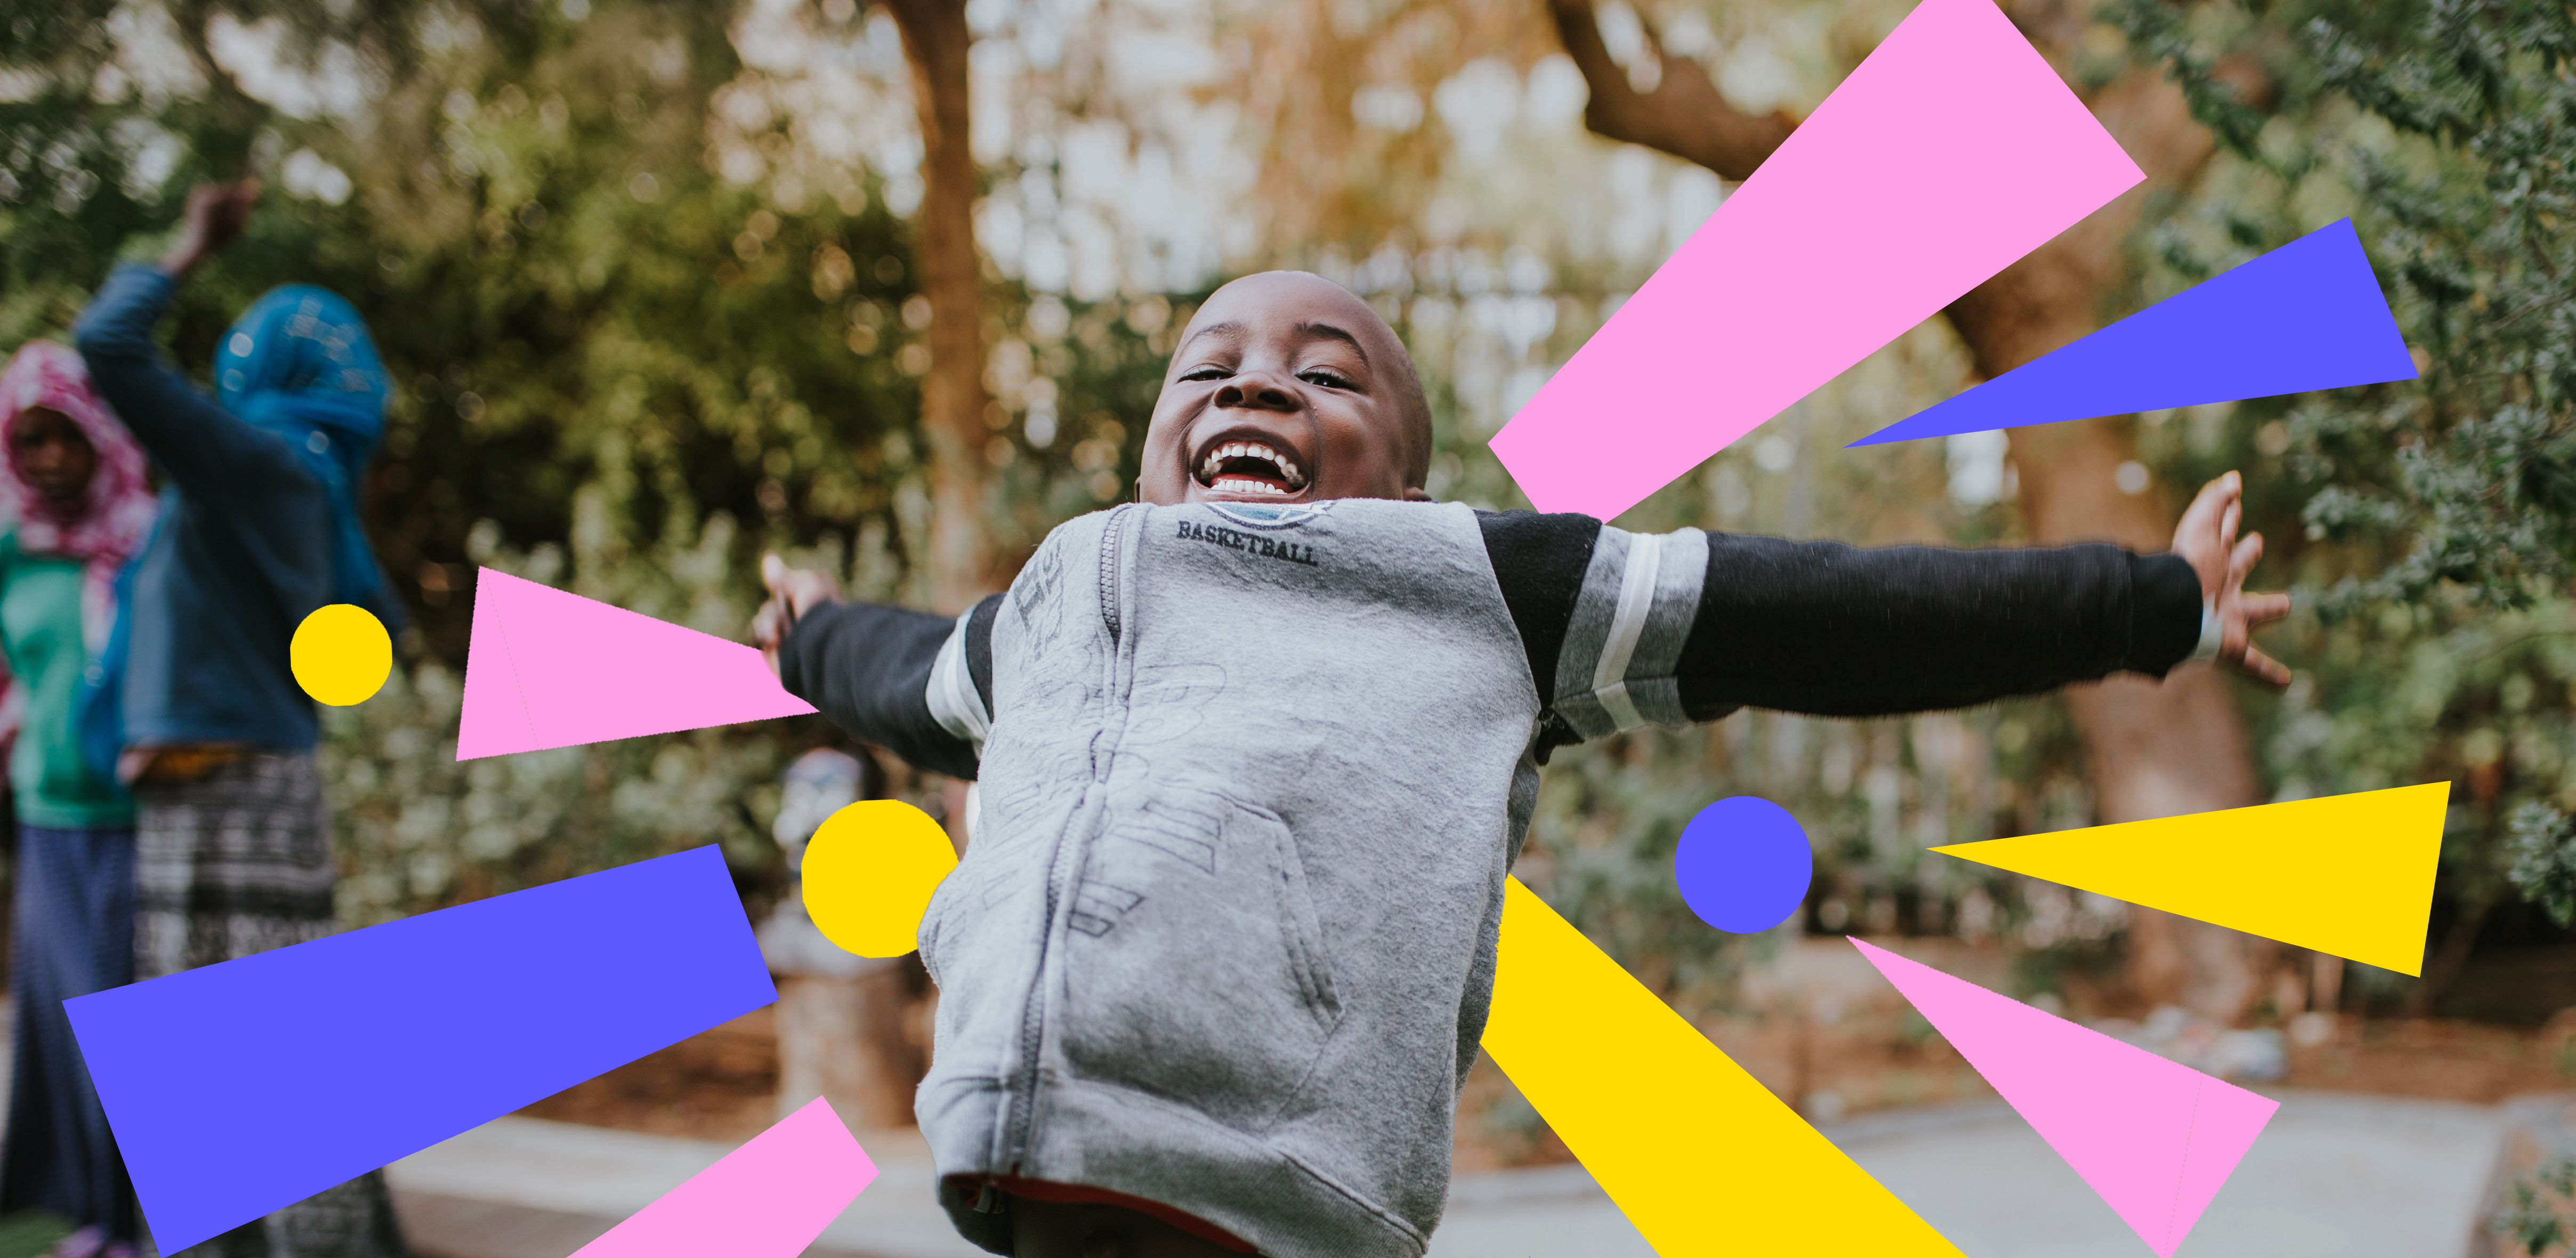 New research shows that play is one of the most effective ways to support children’s psychosocial wellbeing, social and emotional development, and learning, as it allows them to express themselves and connect with others in ways that go well beyond what they can say with words.